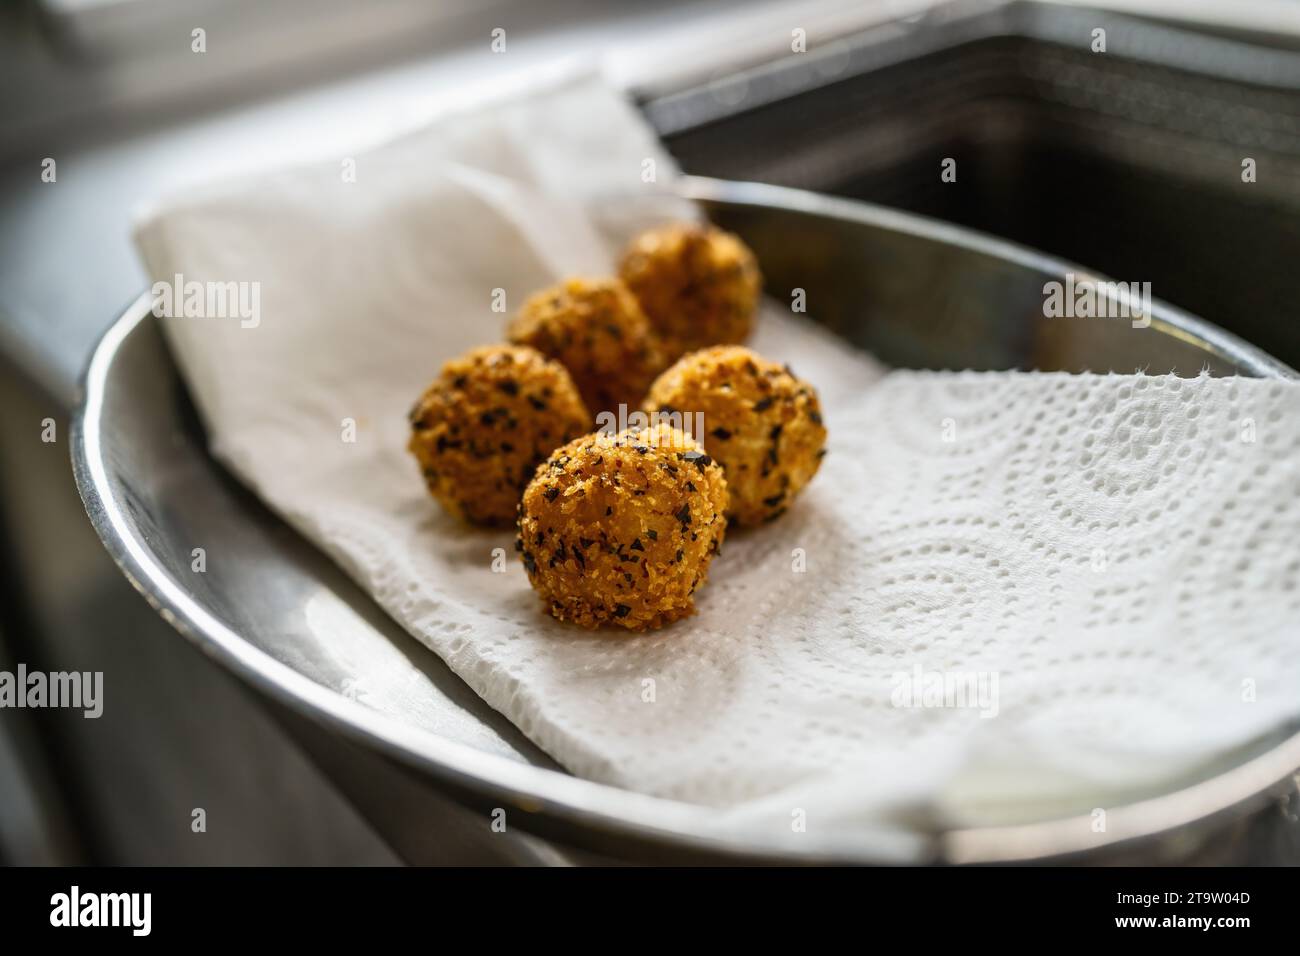 appetizer of fried potato balls with herbs in kitchen of a restaurant. Food Photography Concept image Stock Photo